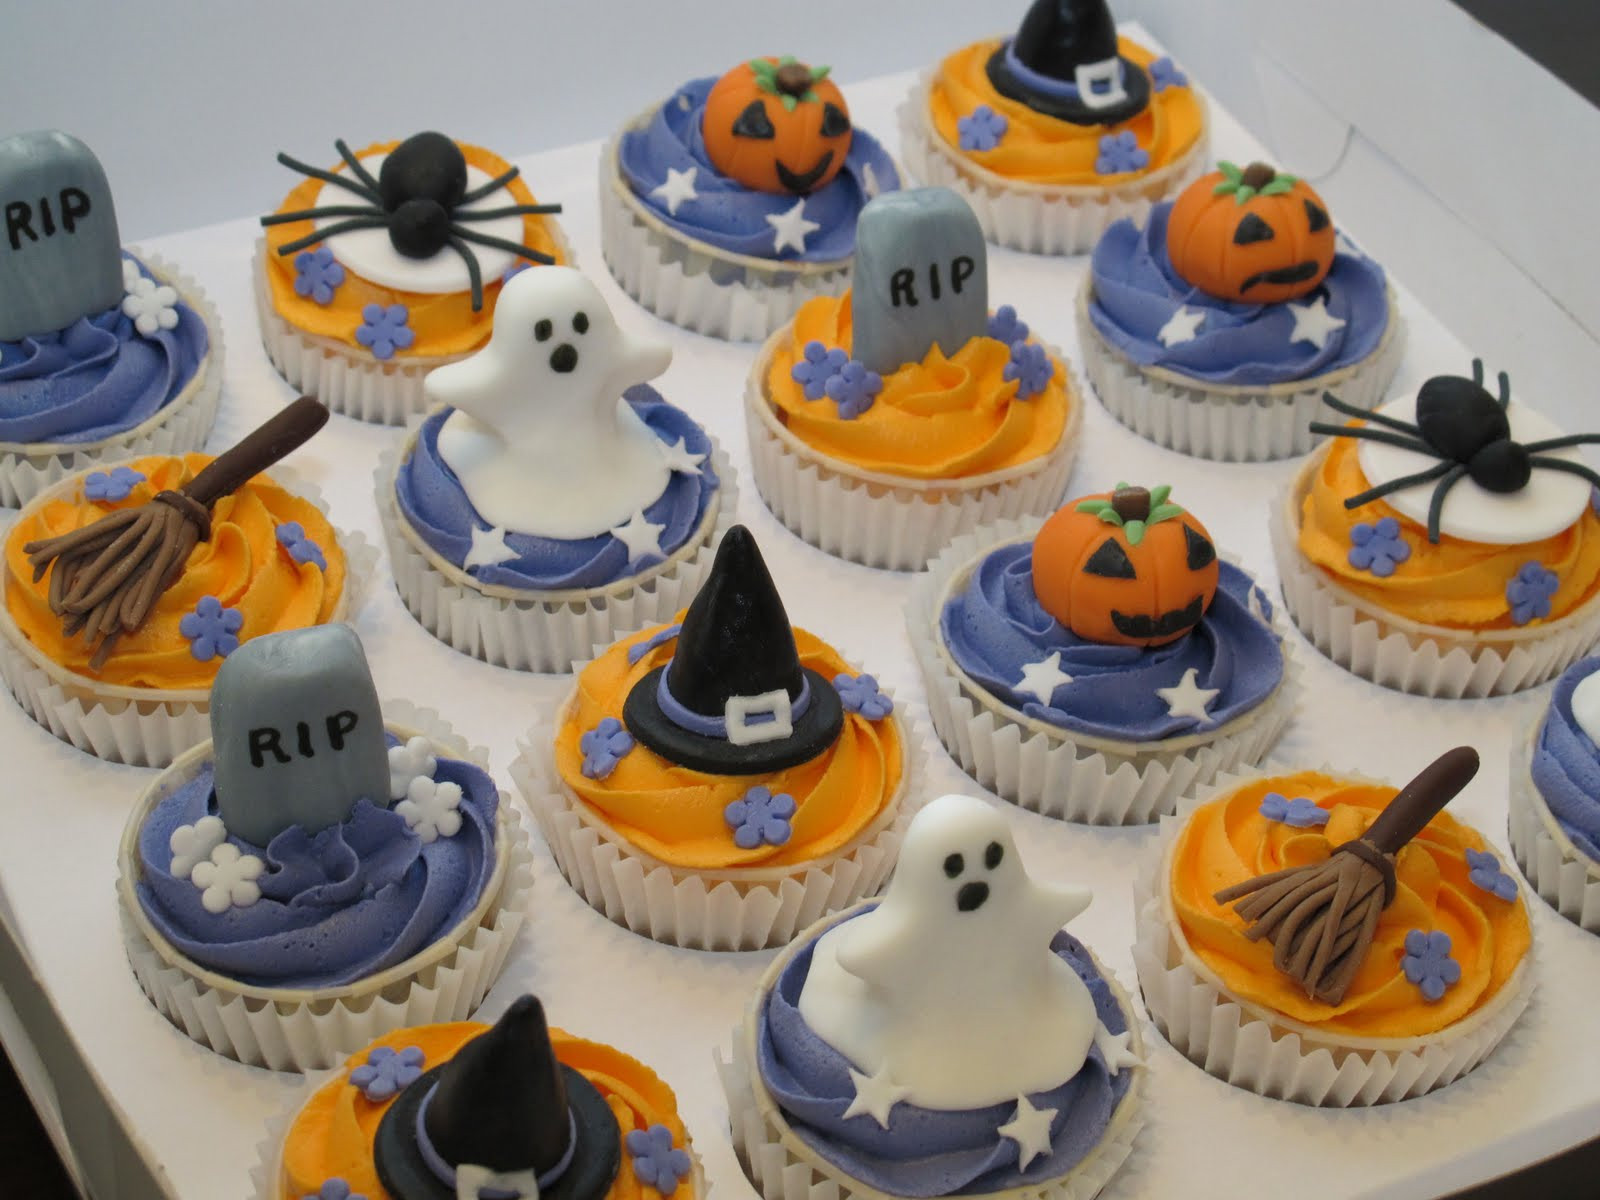 Halloween Cupcakes Decorating Ideas
 Pink Oven Cakes and Cookies Halloween cupcake ideas